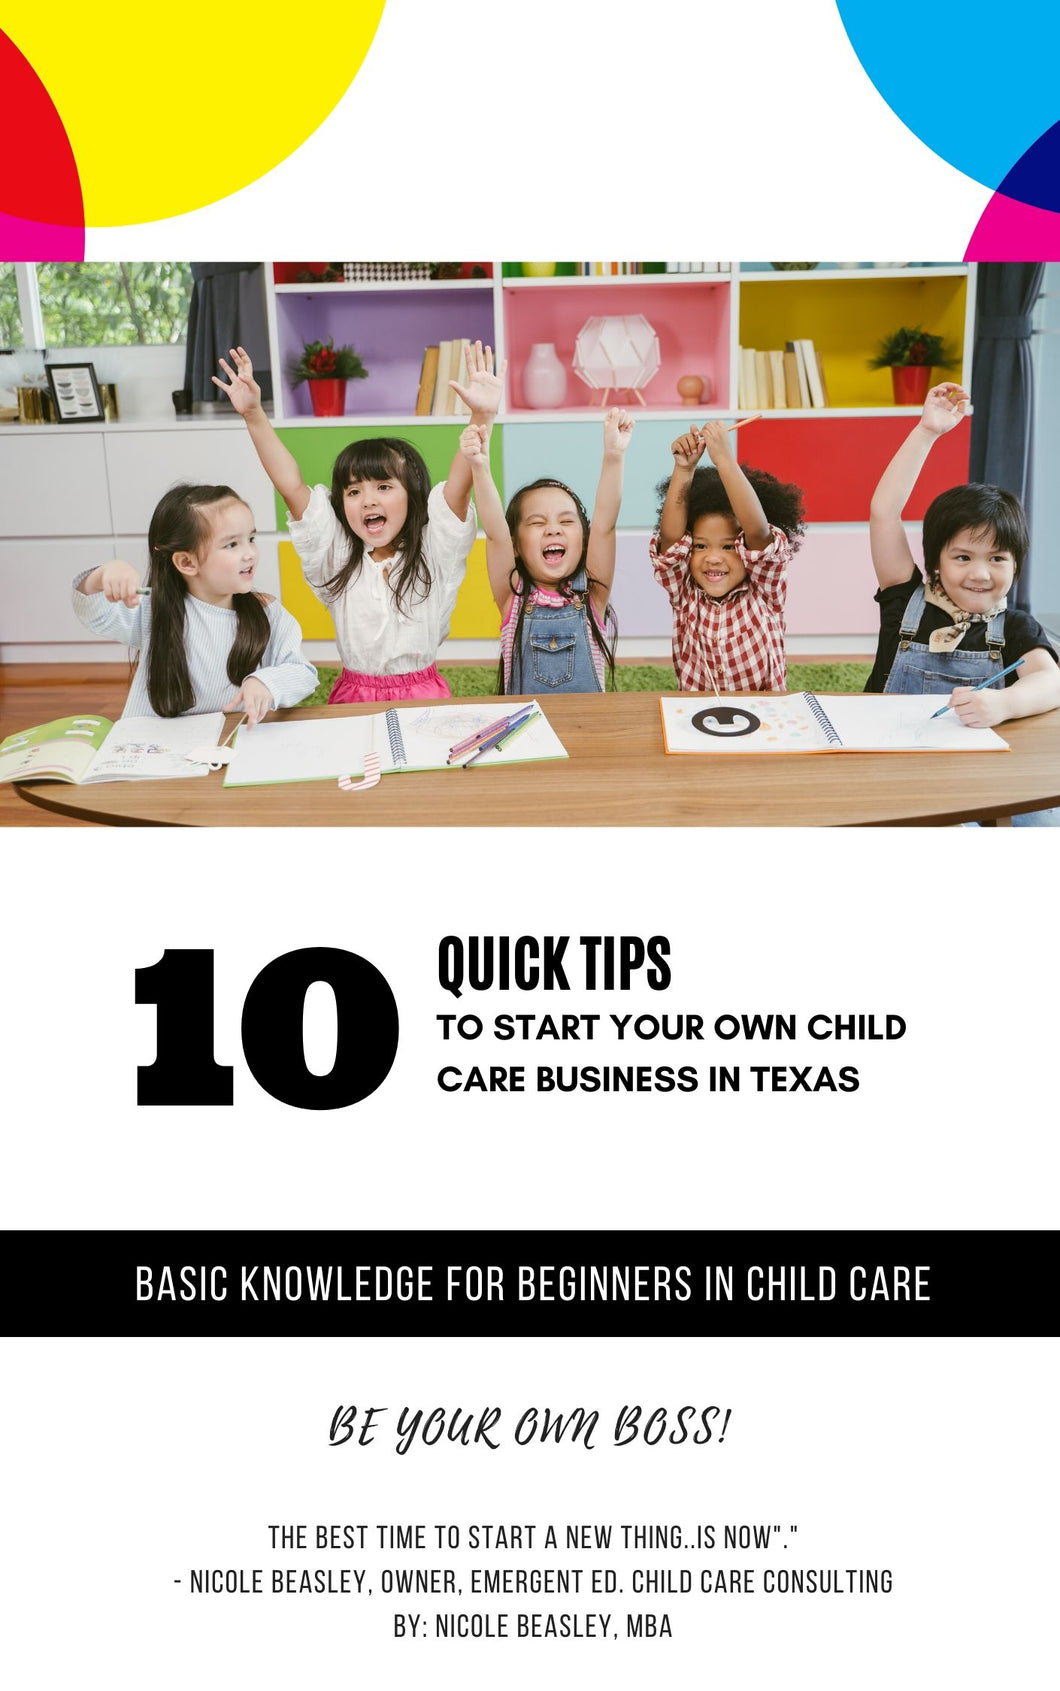 10 Quick Tips to Starting Your Own Child Care Business - FREE Download!